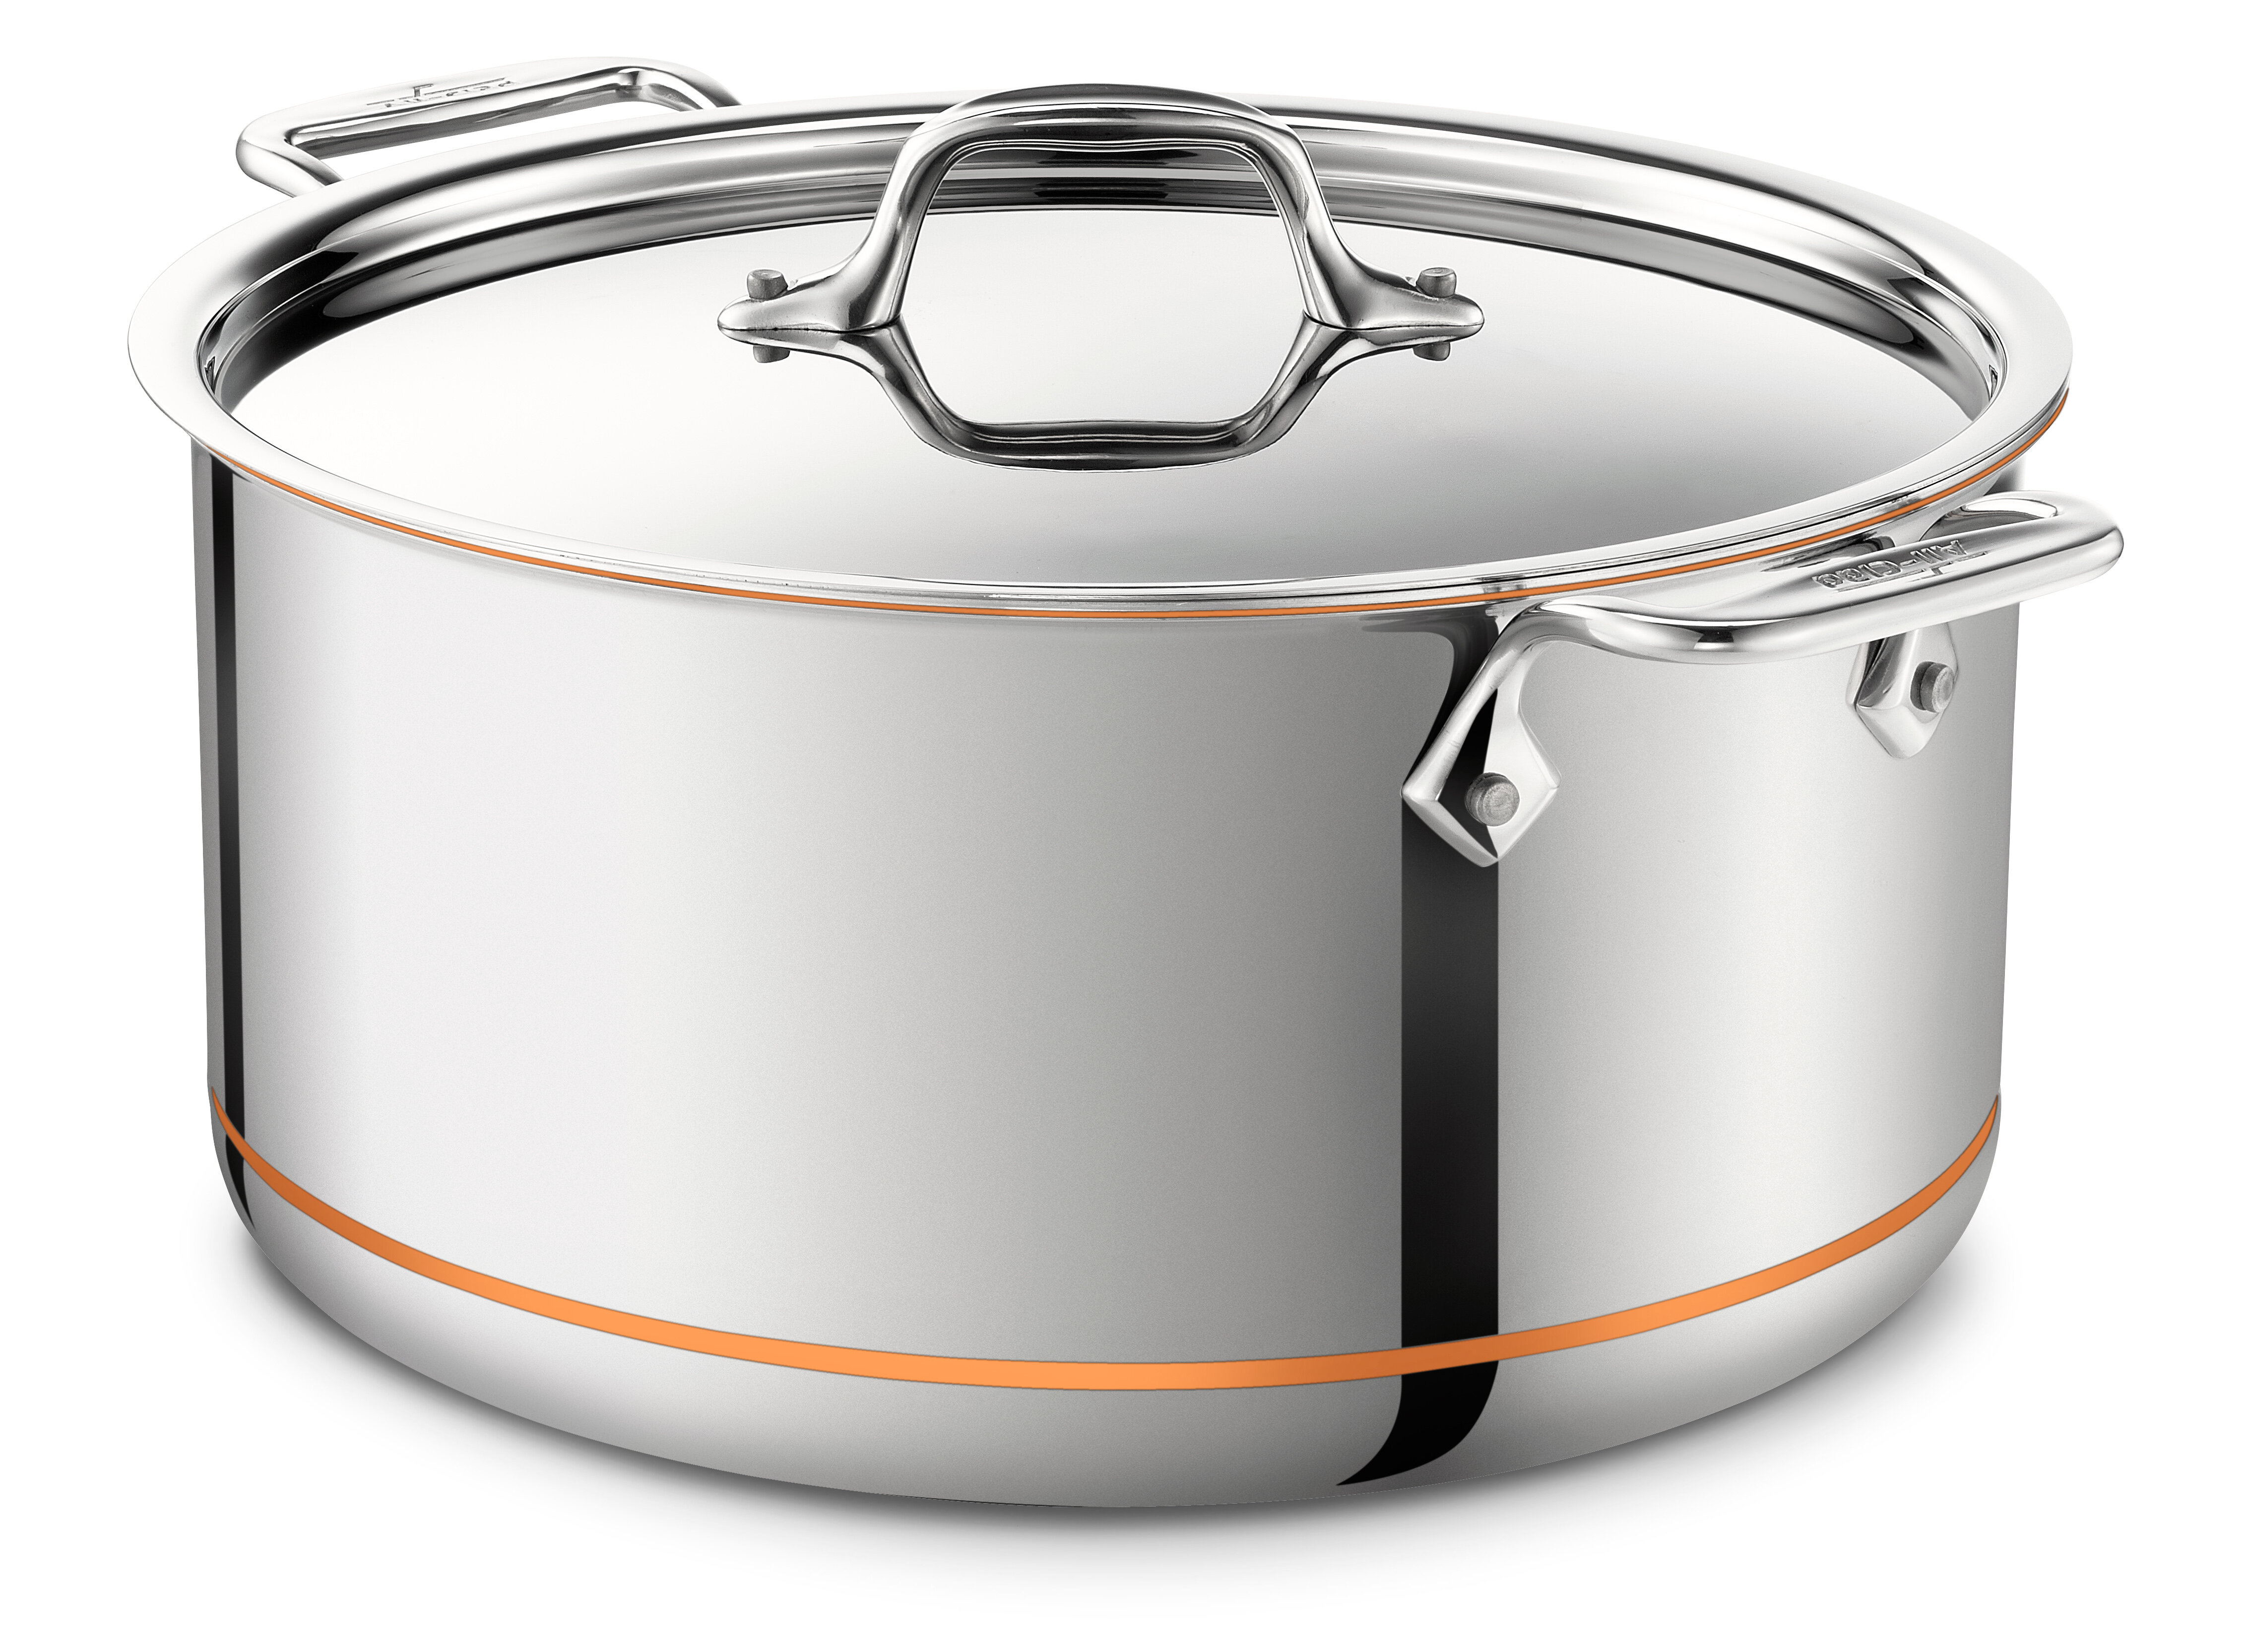 All-Clad All Clad Copper Core 2 Quart Covered Sauce Pan